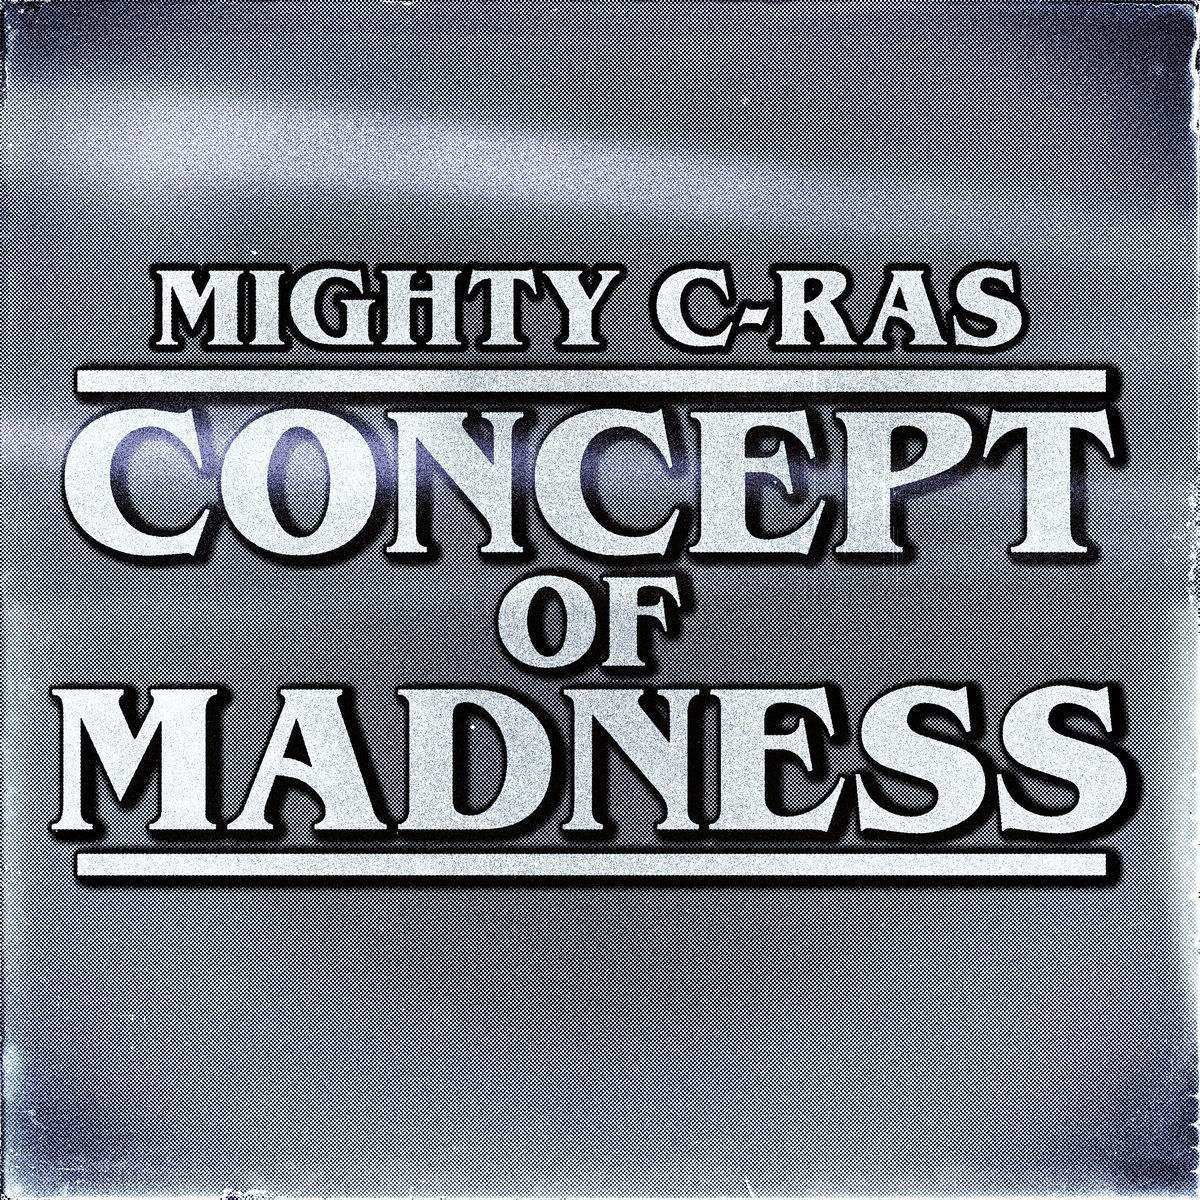 Pre-Order: Mighty C-Ras - Concept of Madness